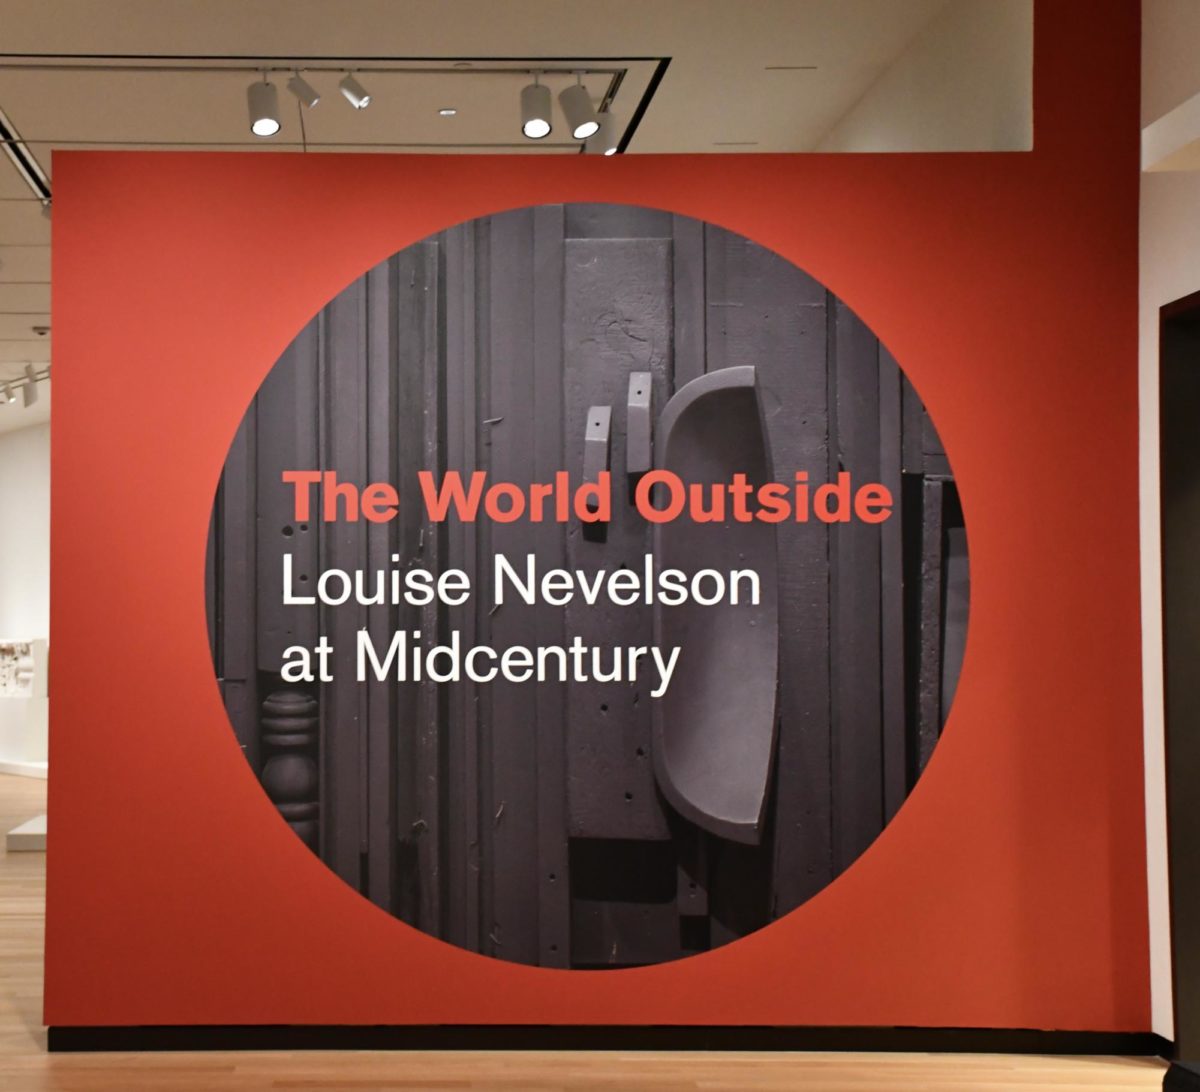 The Amon Carter Museum of American Art is featuring the work of Louise Nevelson.
